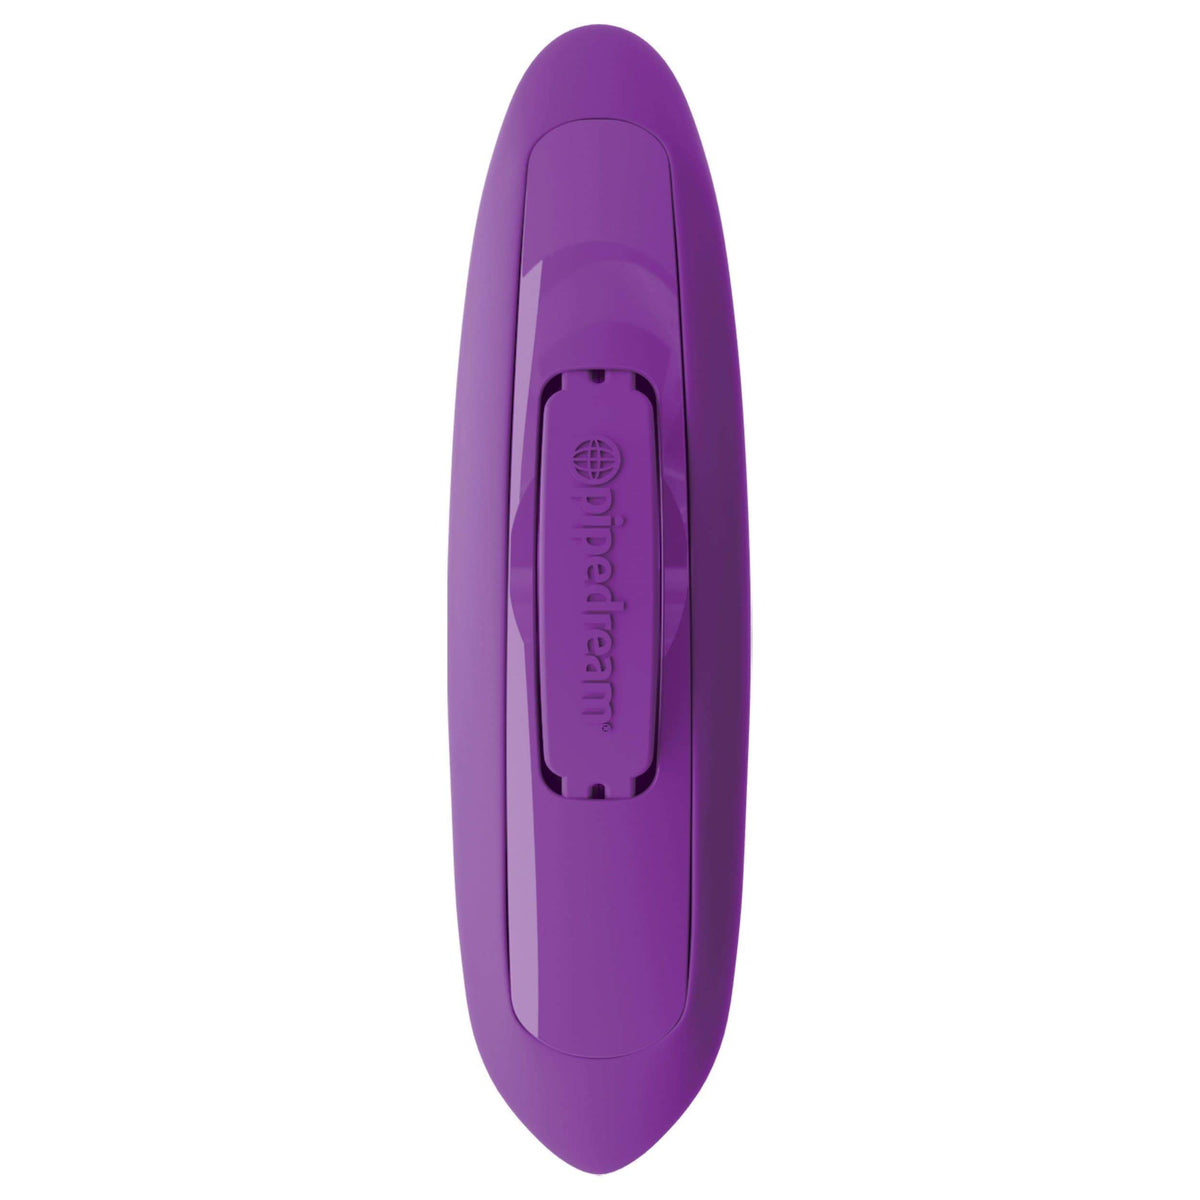 Pipedream - 3Some Myself and Us Rock N Ride Silicone Vibrator (Purple) PD1827 CherryAffairs